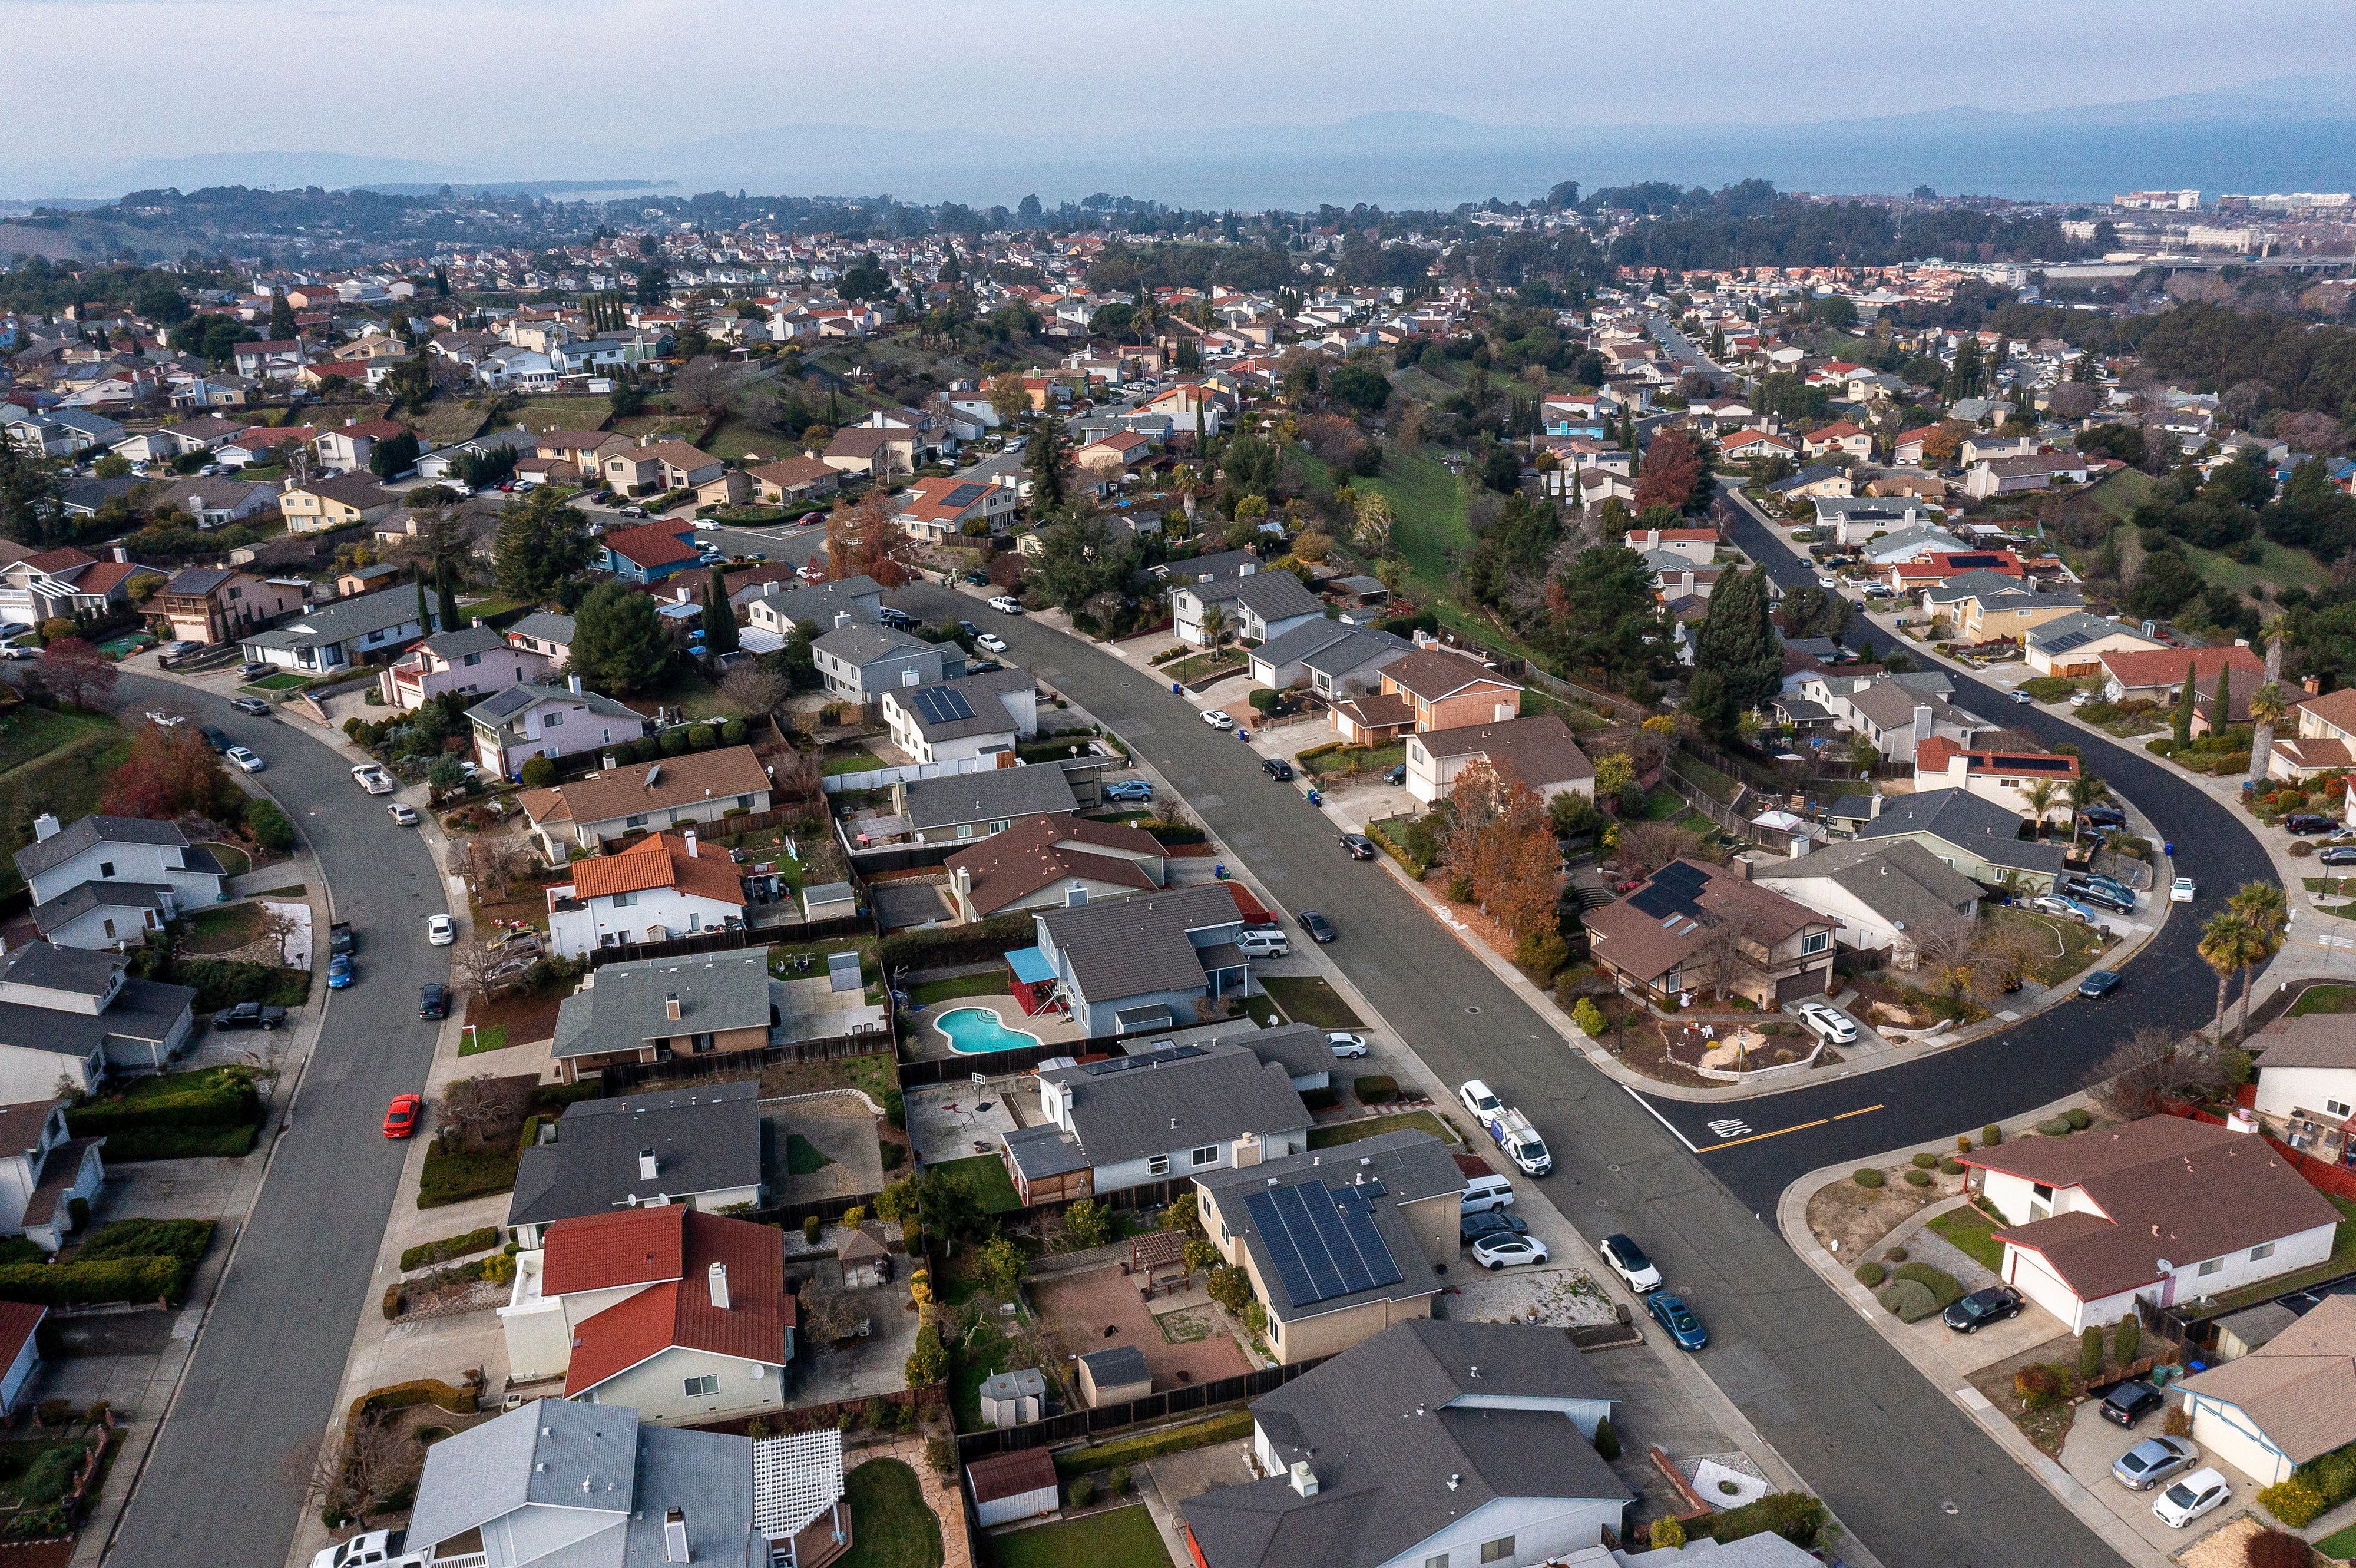 The 6% commission on buying or selling a home is gone after Realtors association agrees to seismic settlement | CNN Business